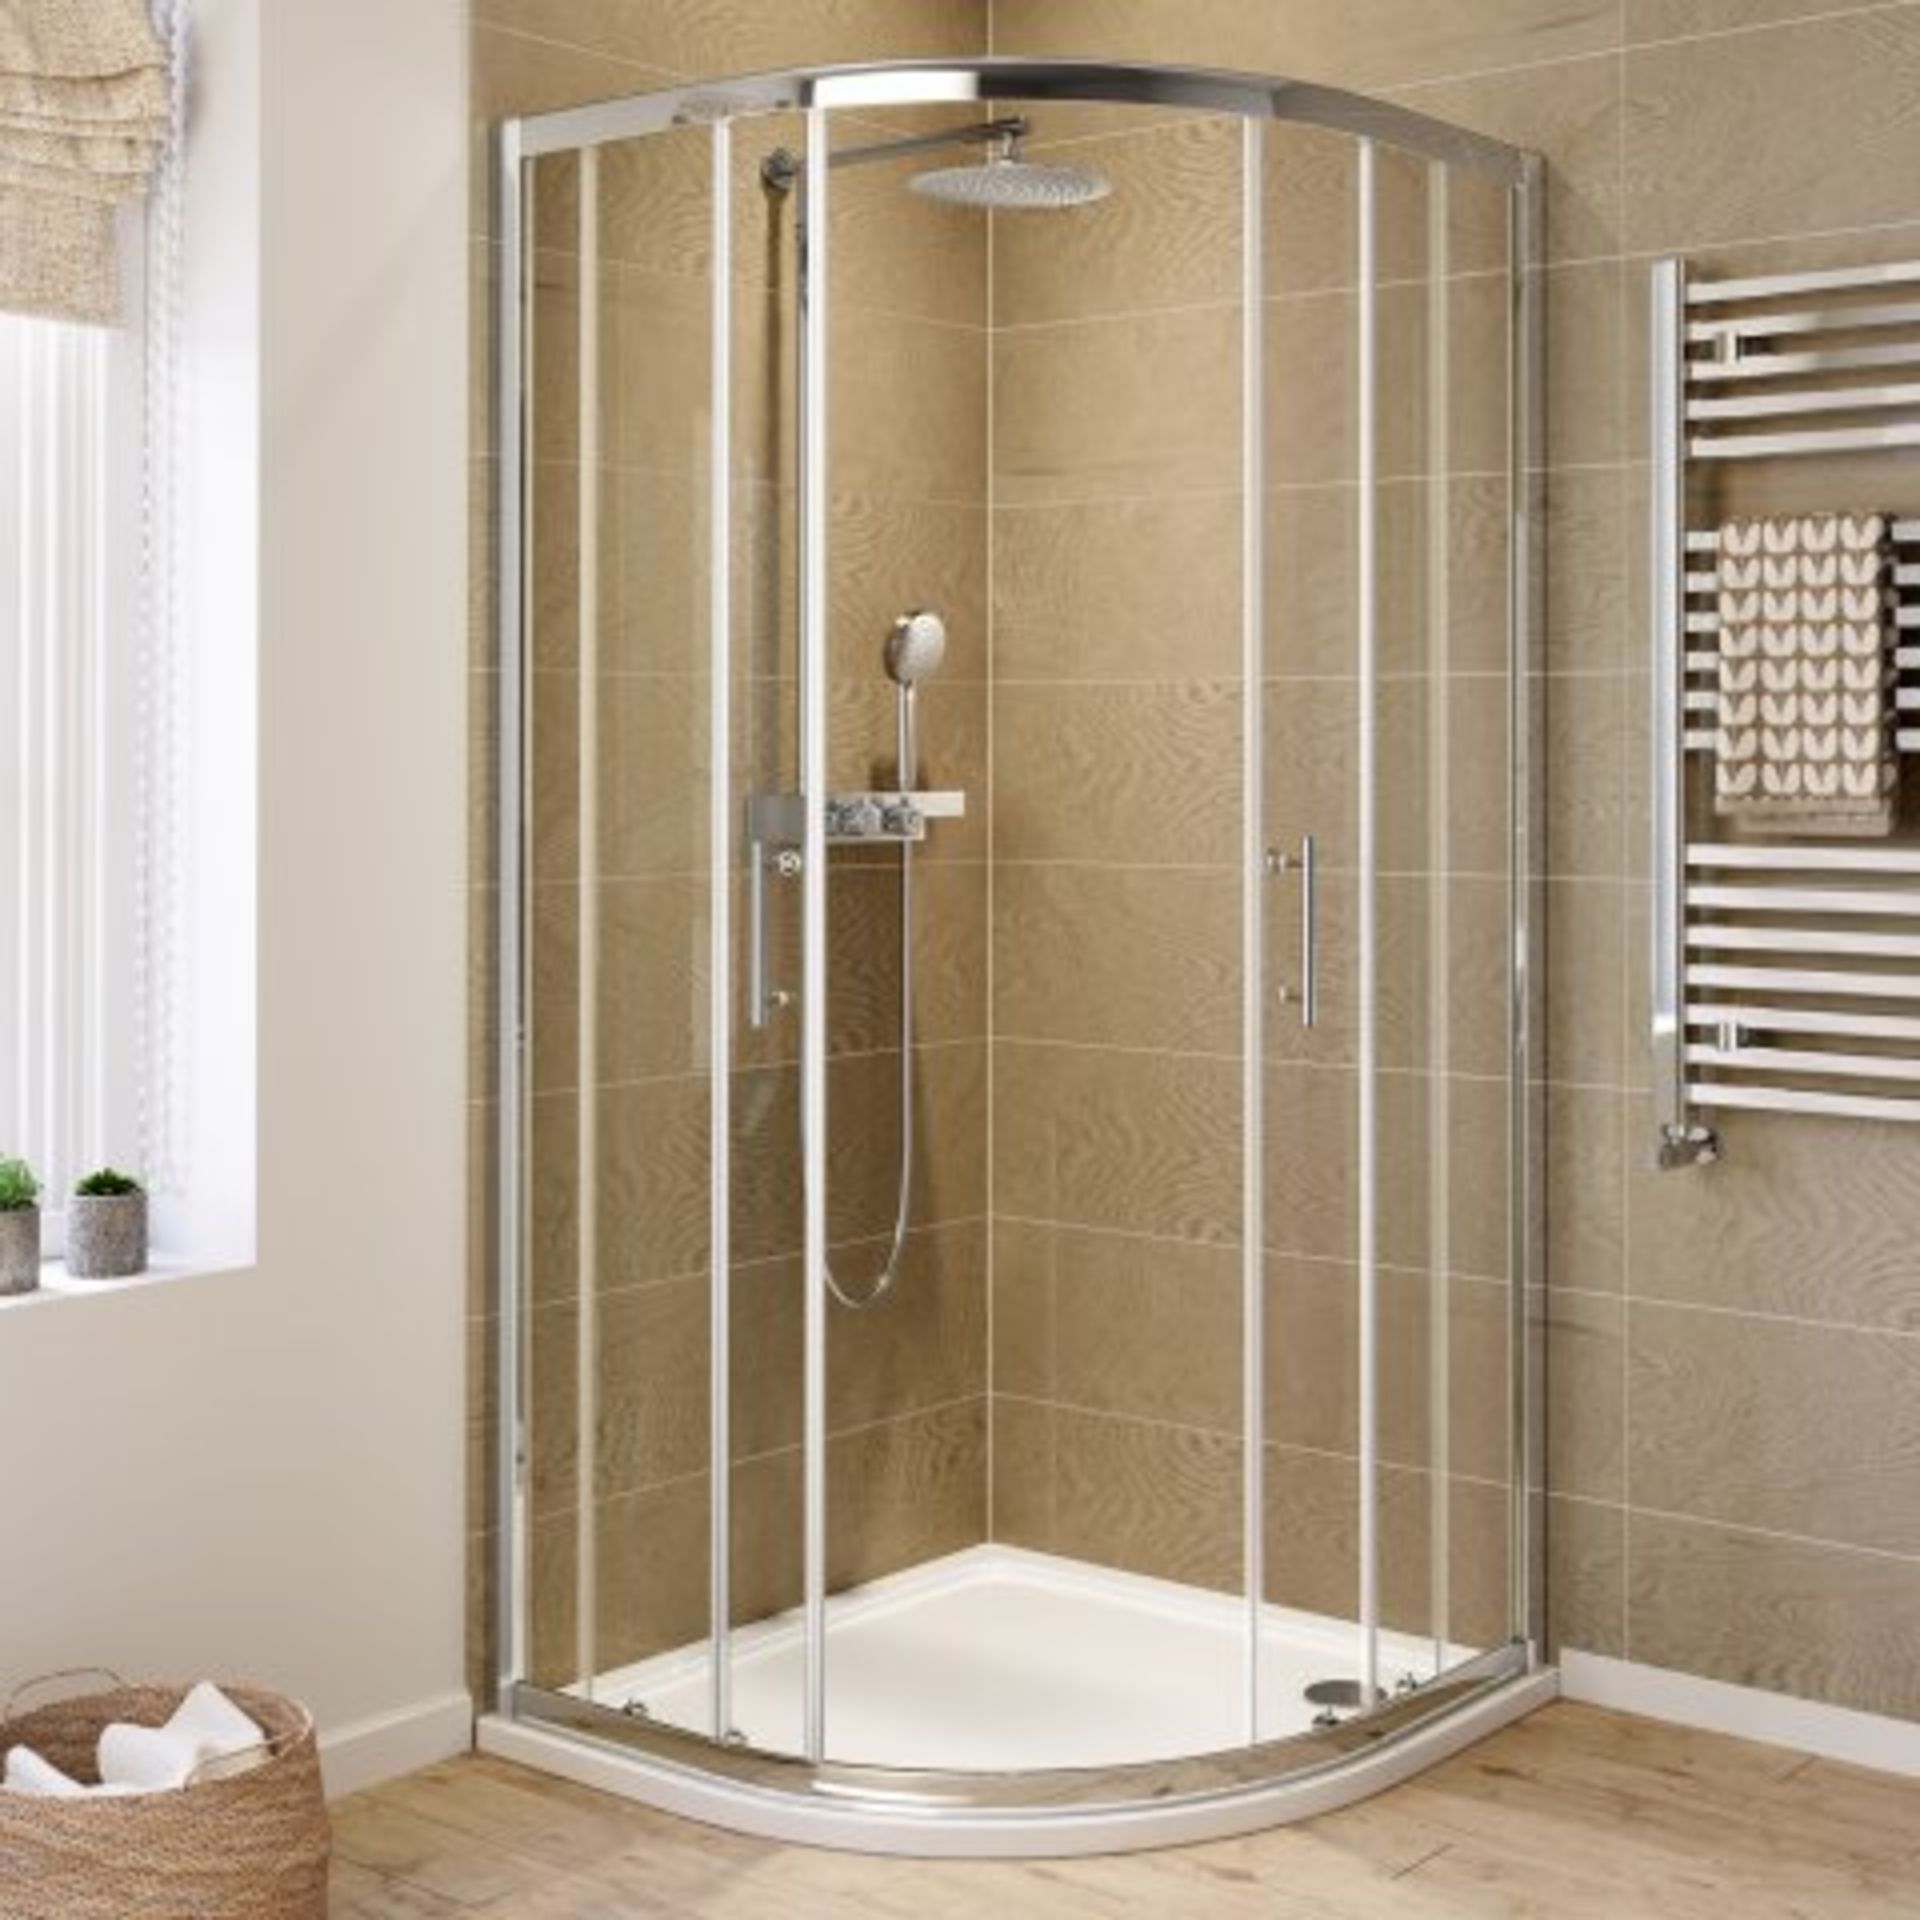 (O71) 900x900mm - 6mm - Elements Quadrant Shower Enclosure. RRP £272.99. Make the most of that